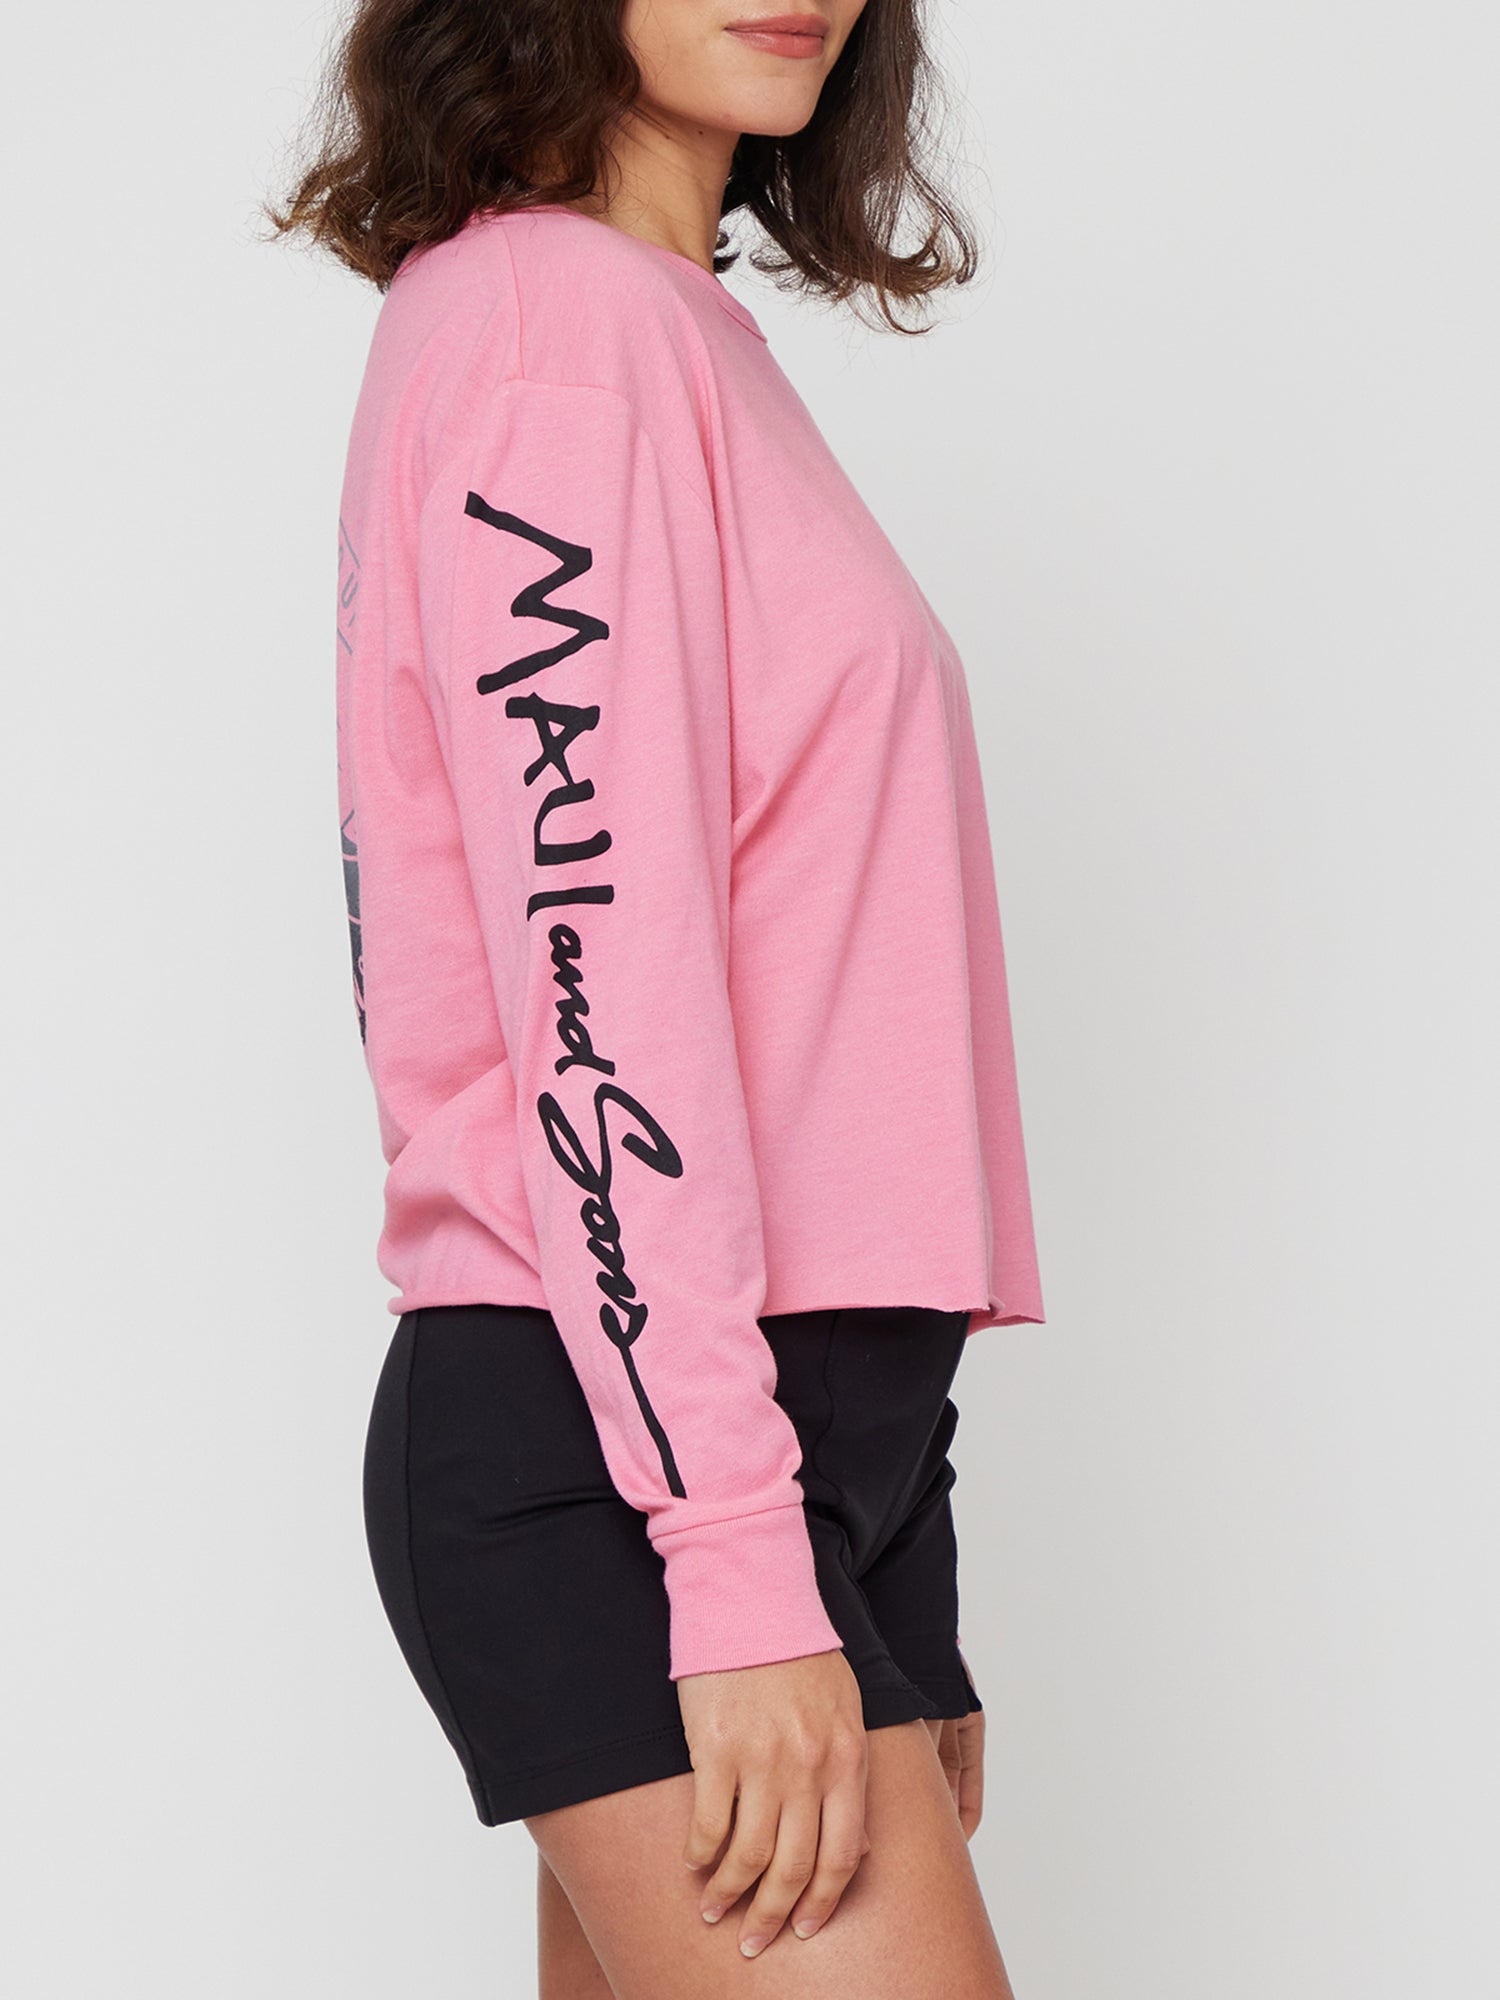 Set You Free Womens Long Sleeve in Coral